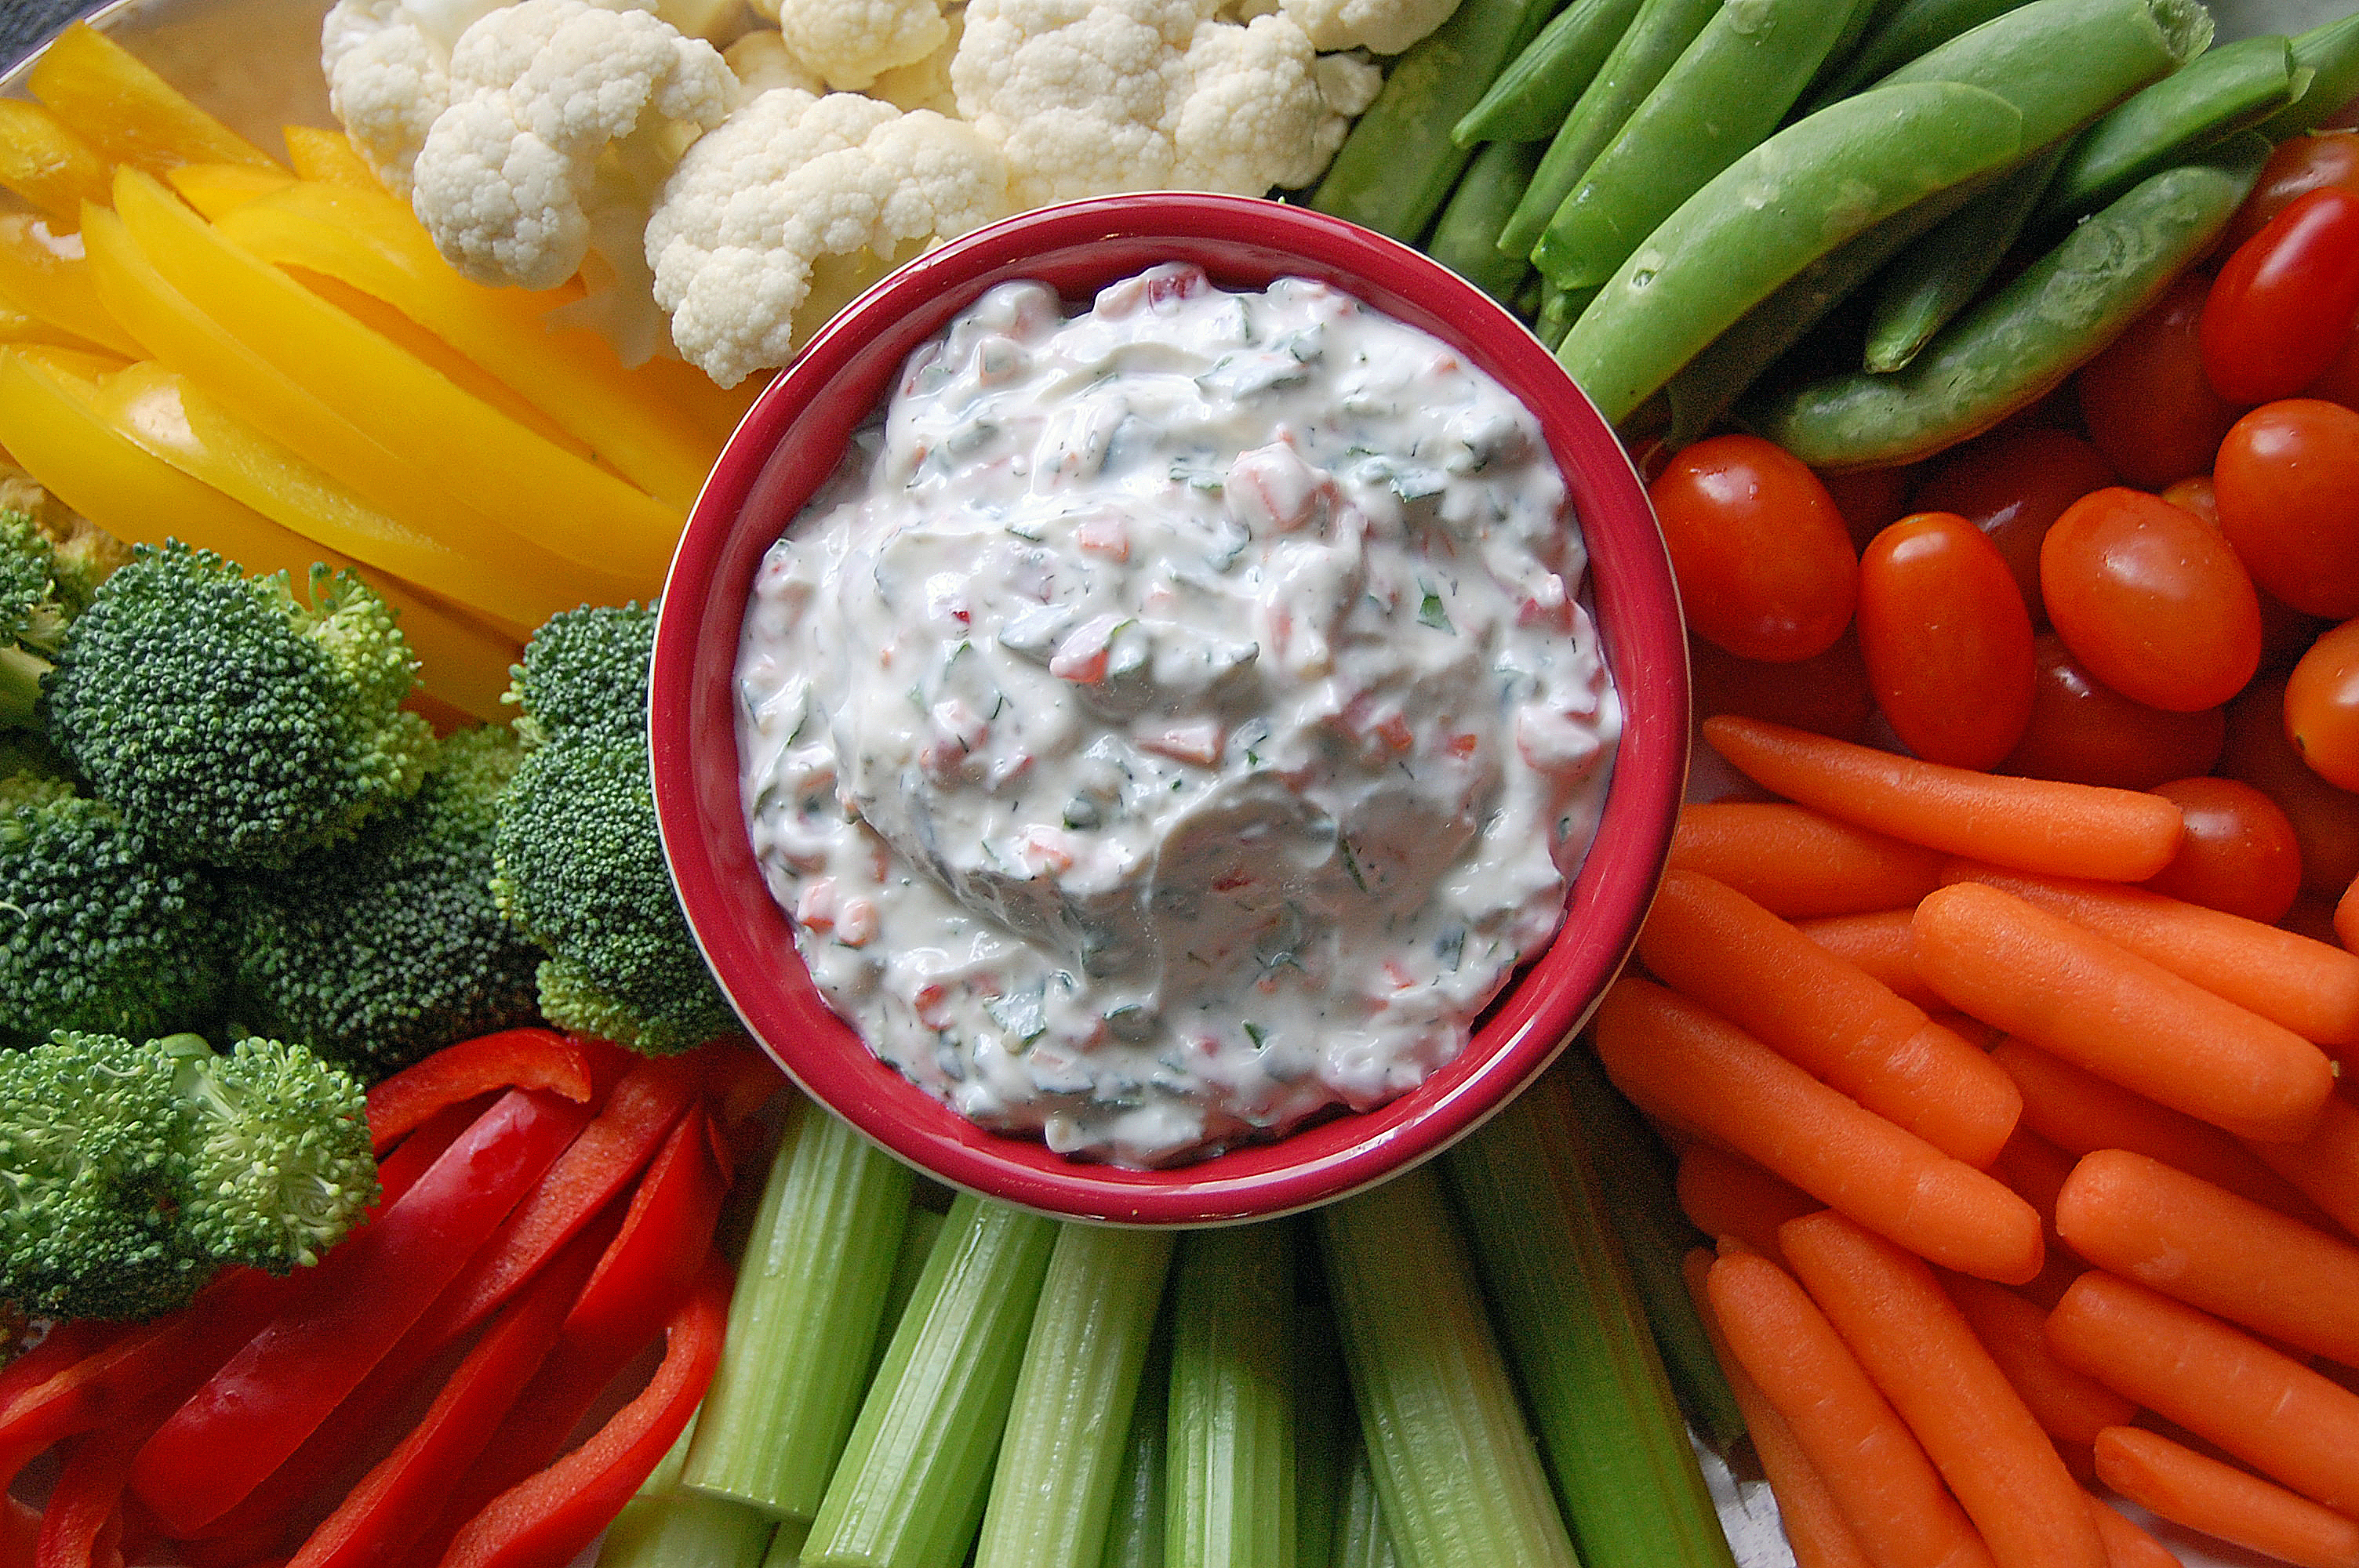 This dip combines dairy with various chopped vegetables. (NDSU photo)